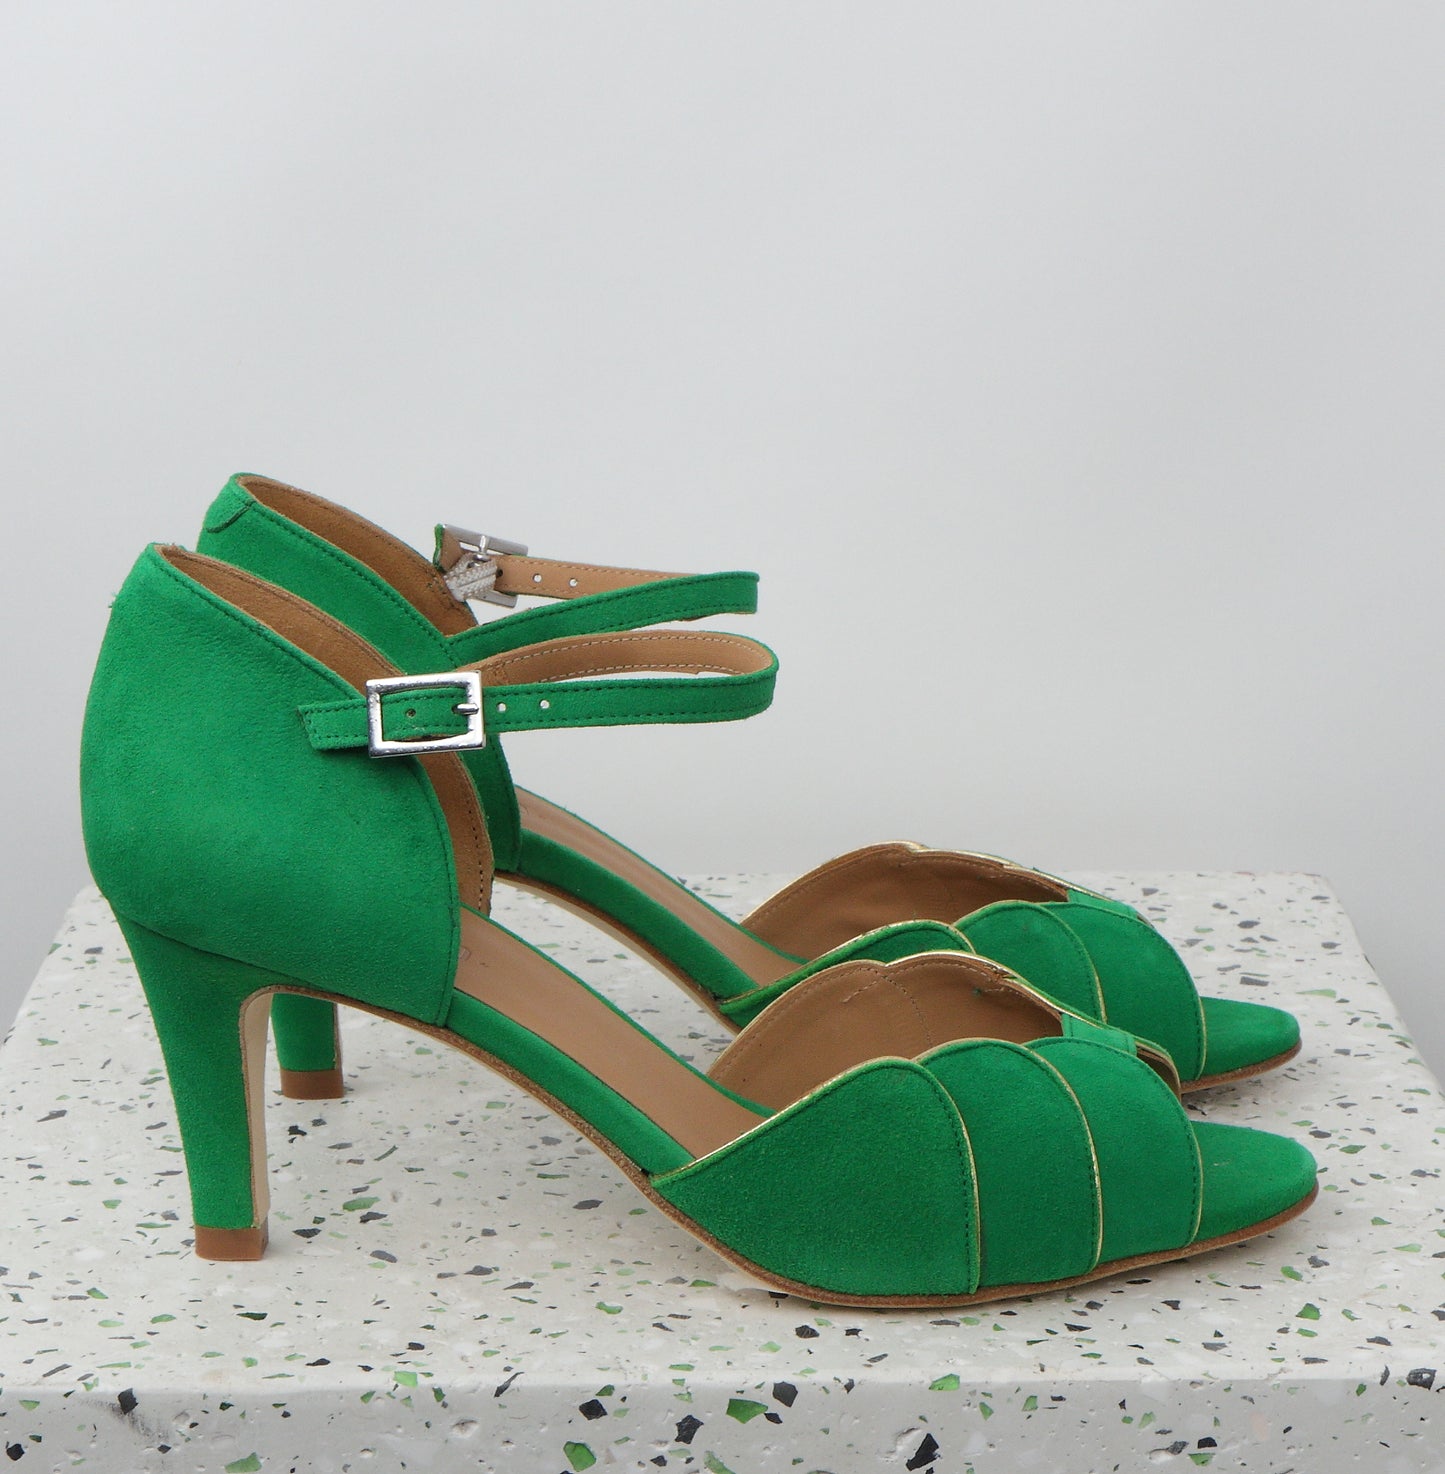 PHOEBE Suede Bright Green & Nappa Gold